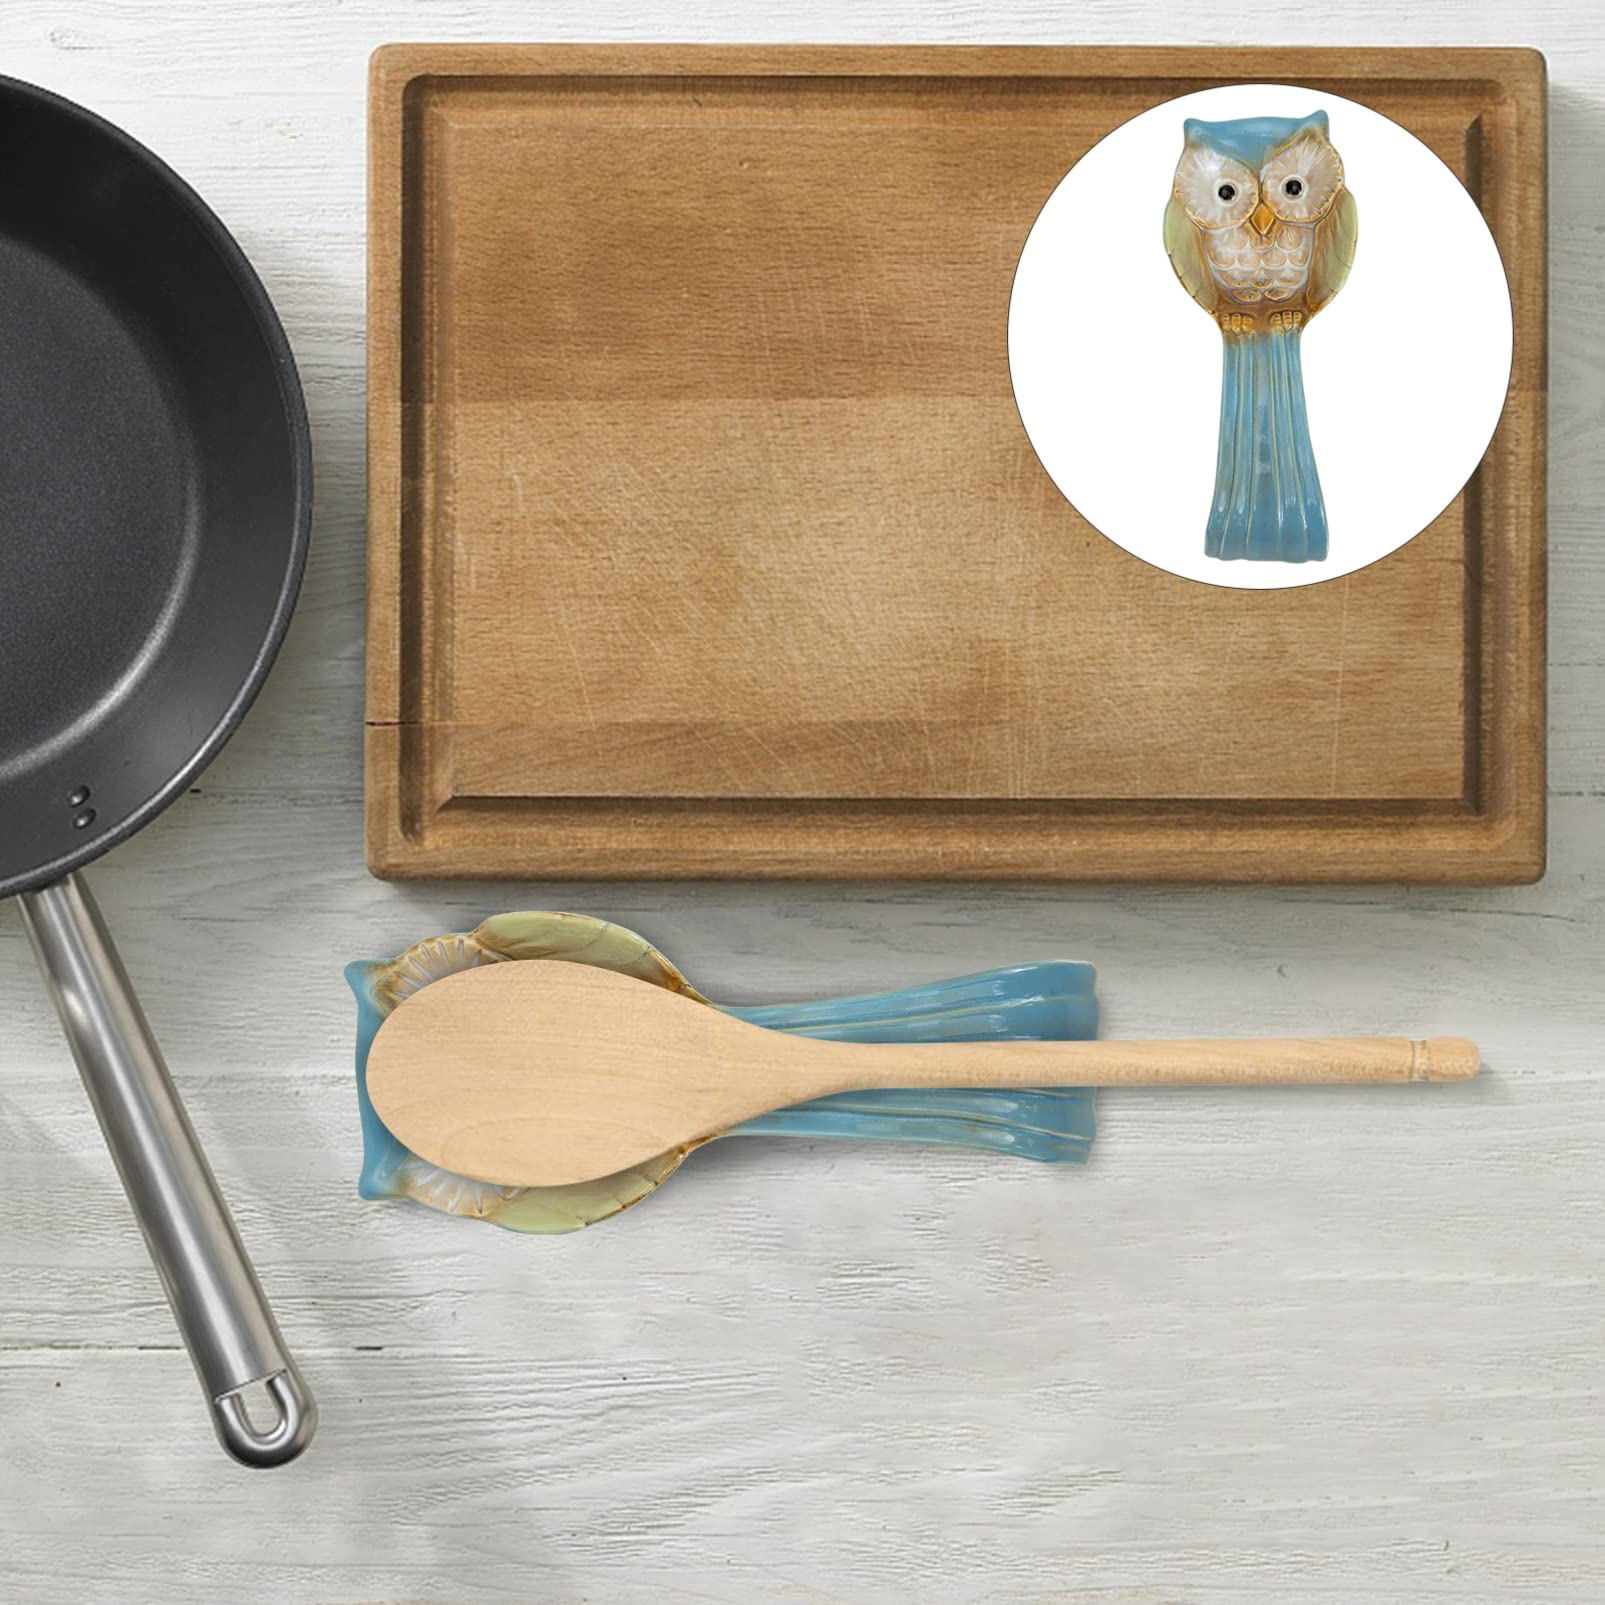 Yardwe Owl Spoon Rest Ceramic Ladle Holder Utensil Rester for Stove Top Kitchen Counter Cooking Utensil and Ladle Rest Holder Dining Table Decoration Blue